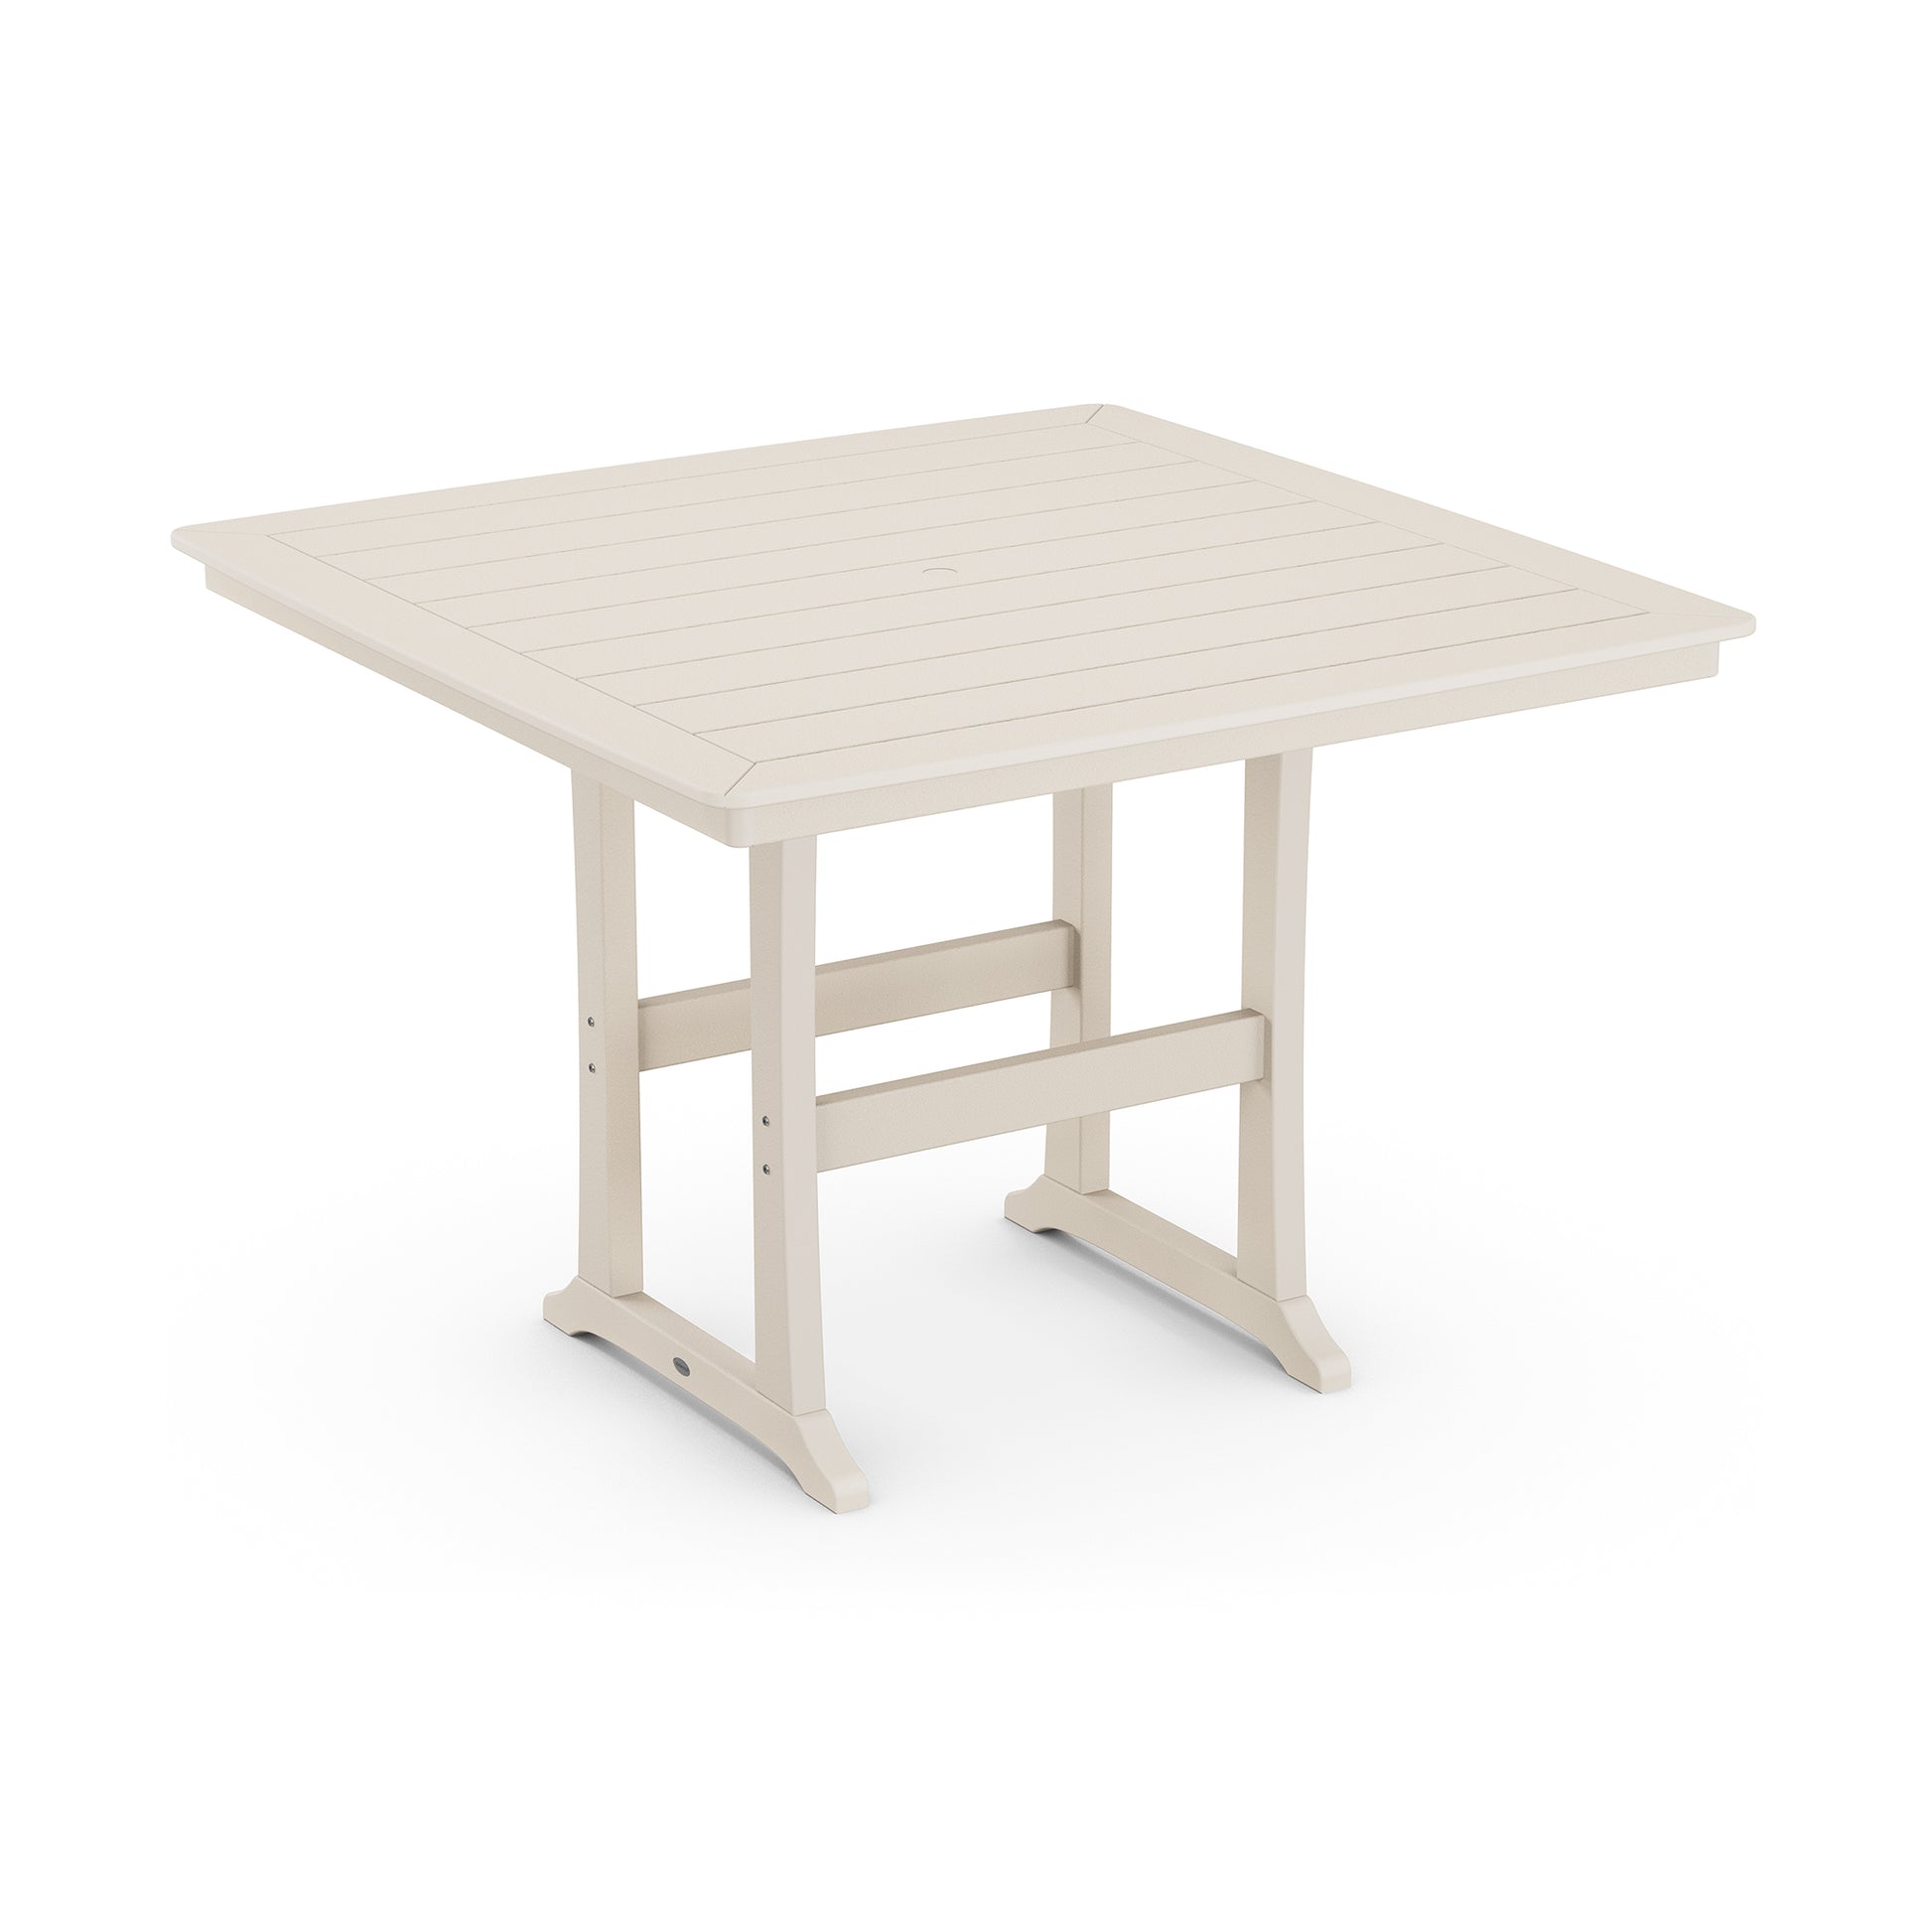 A simple cream-colored square ultra-durable outdoor POLYWOOD Nautical Trestle 59" Bar Table with plank-style top and a sturdy rectangular base, isolated on a white background.